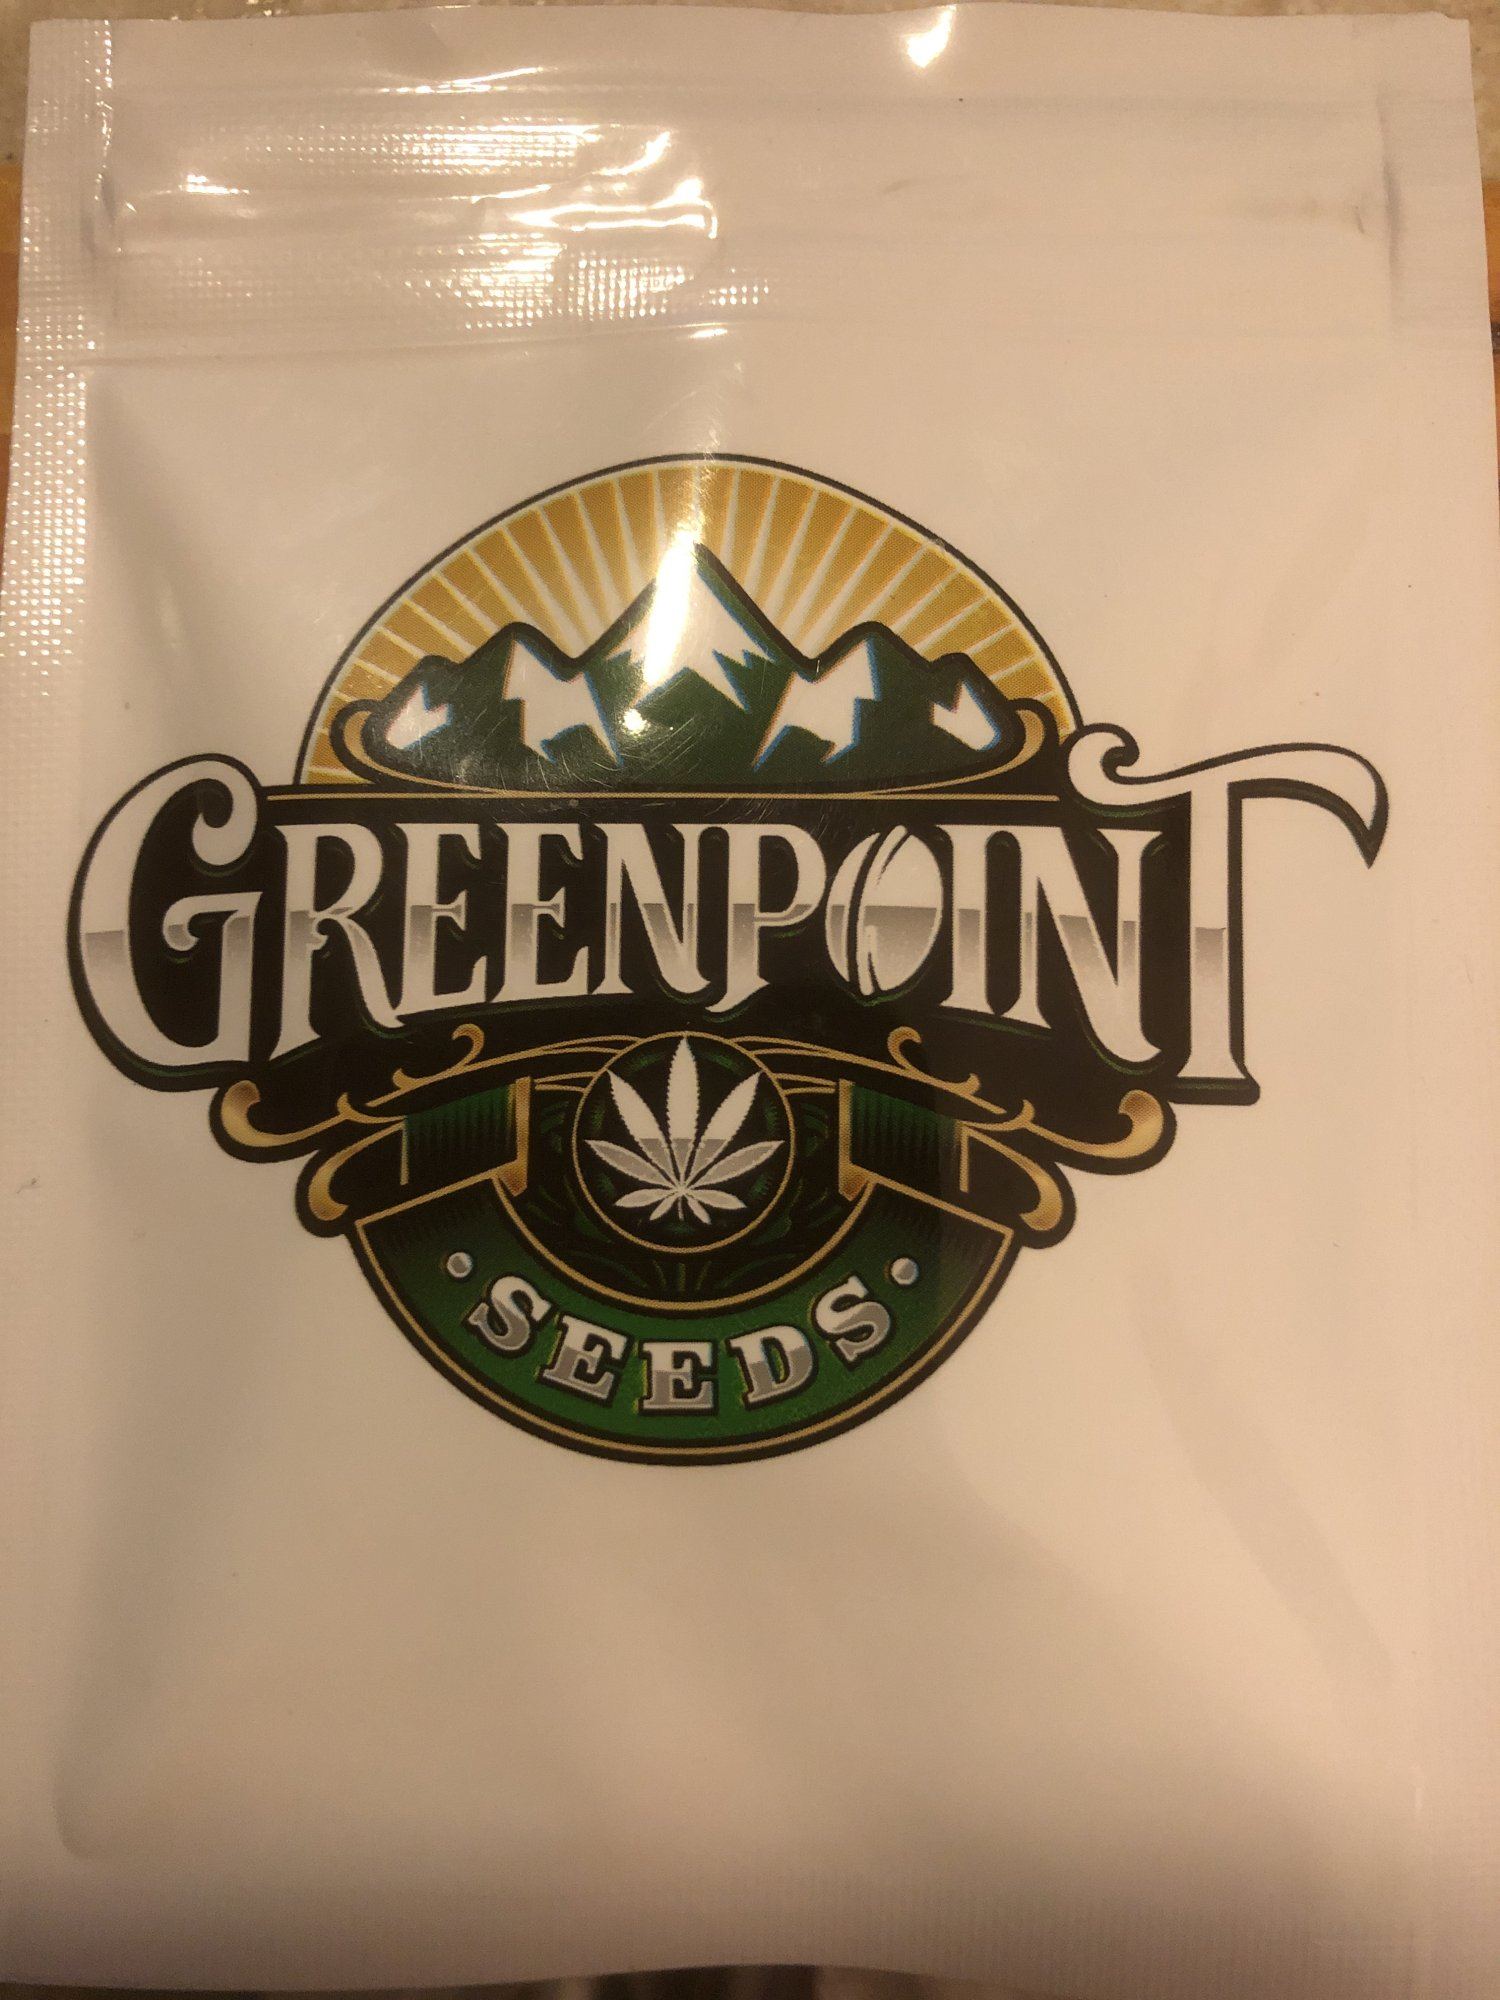 Periwinkle pie   greenpoint seeds 4